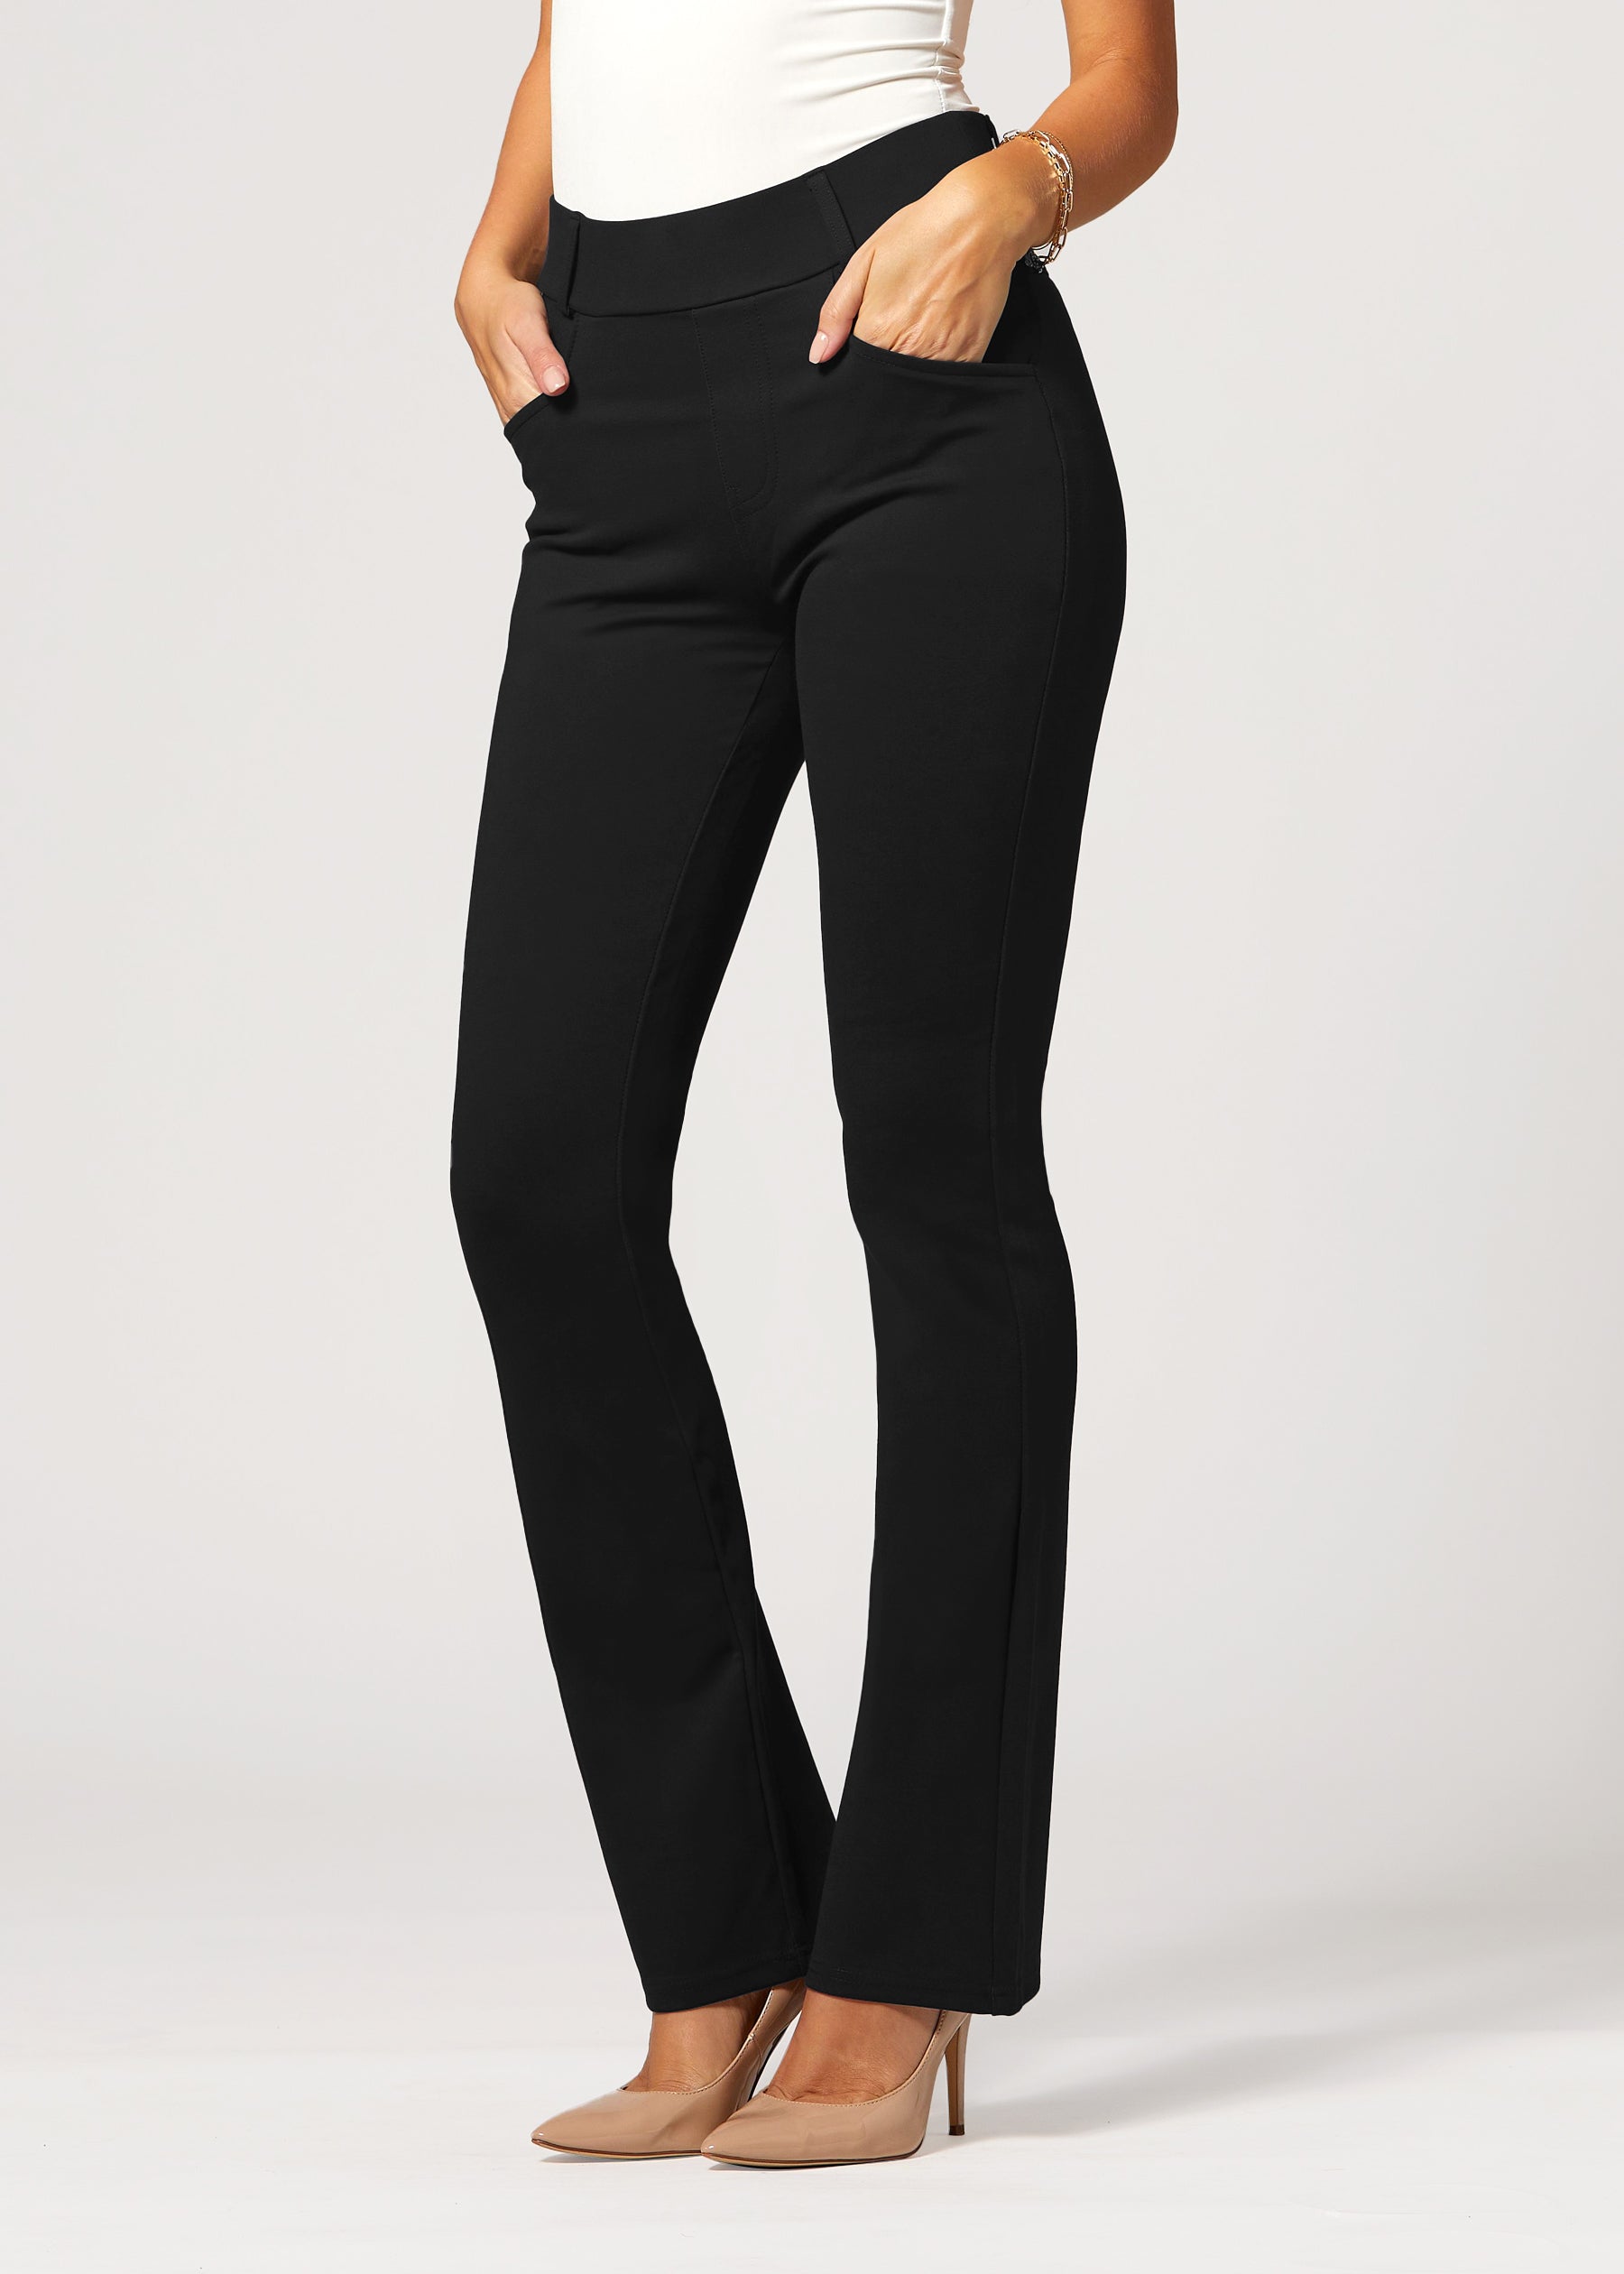 Uplift Ponte Knit Bootcut Dress Pants with Pockets - Conceited Co.